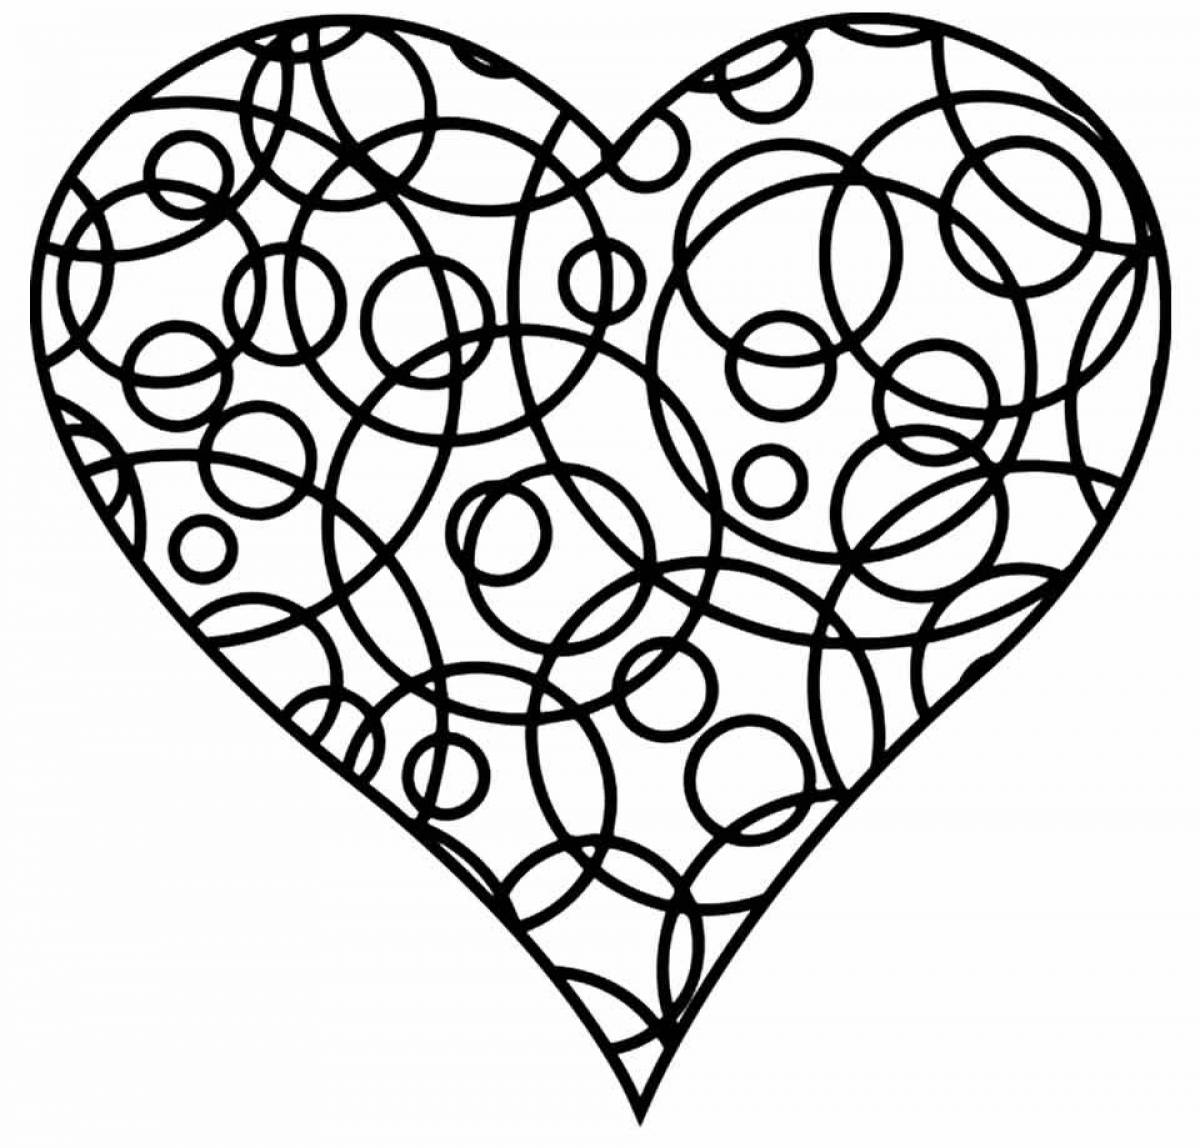 Colorful heart coloring page for kids